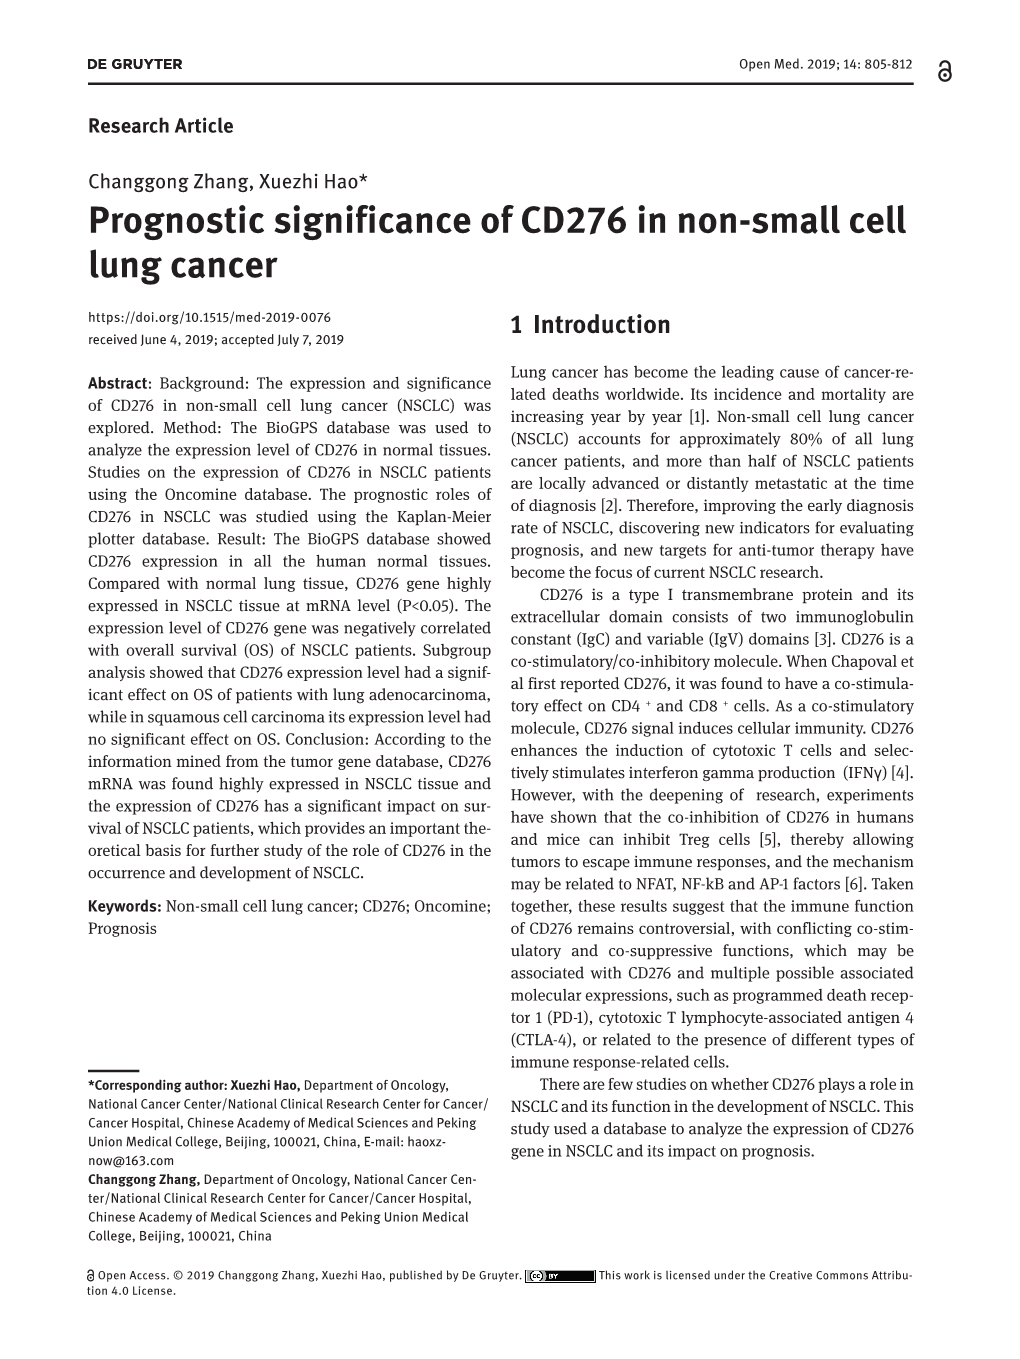 Prognostic Significance of CD276 in Non-Small Cell Lung Cancer Received June 4, 2019; Accepted July 7, 2019 1 Introduction